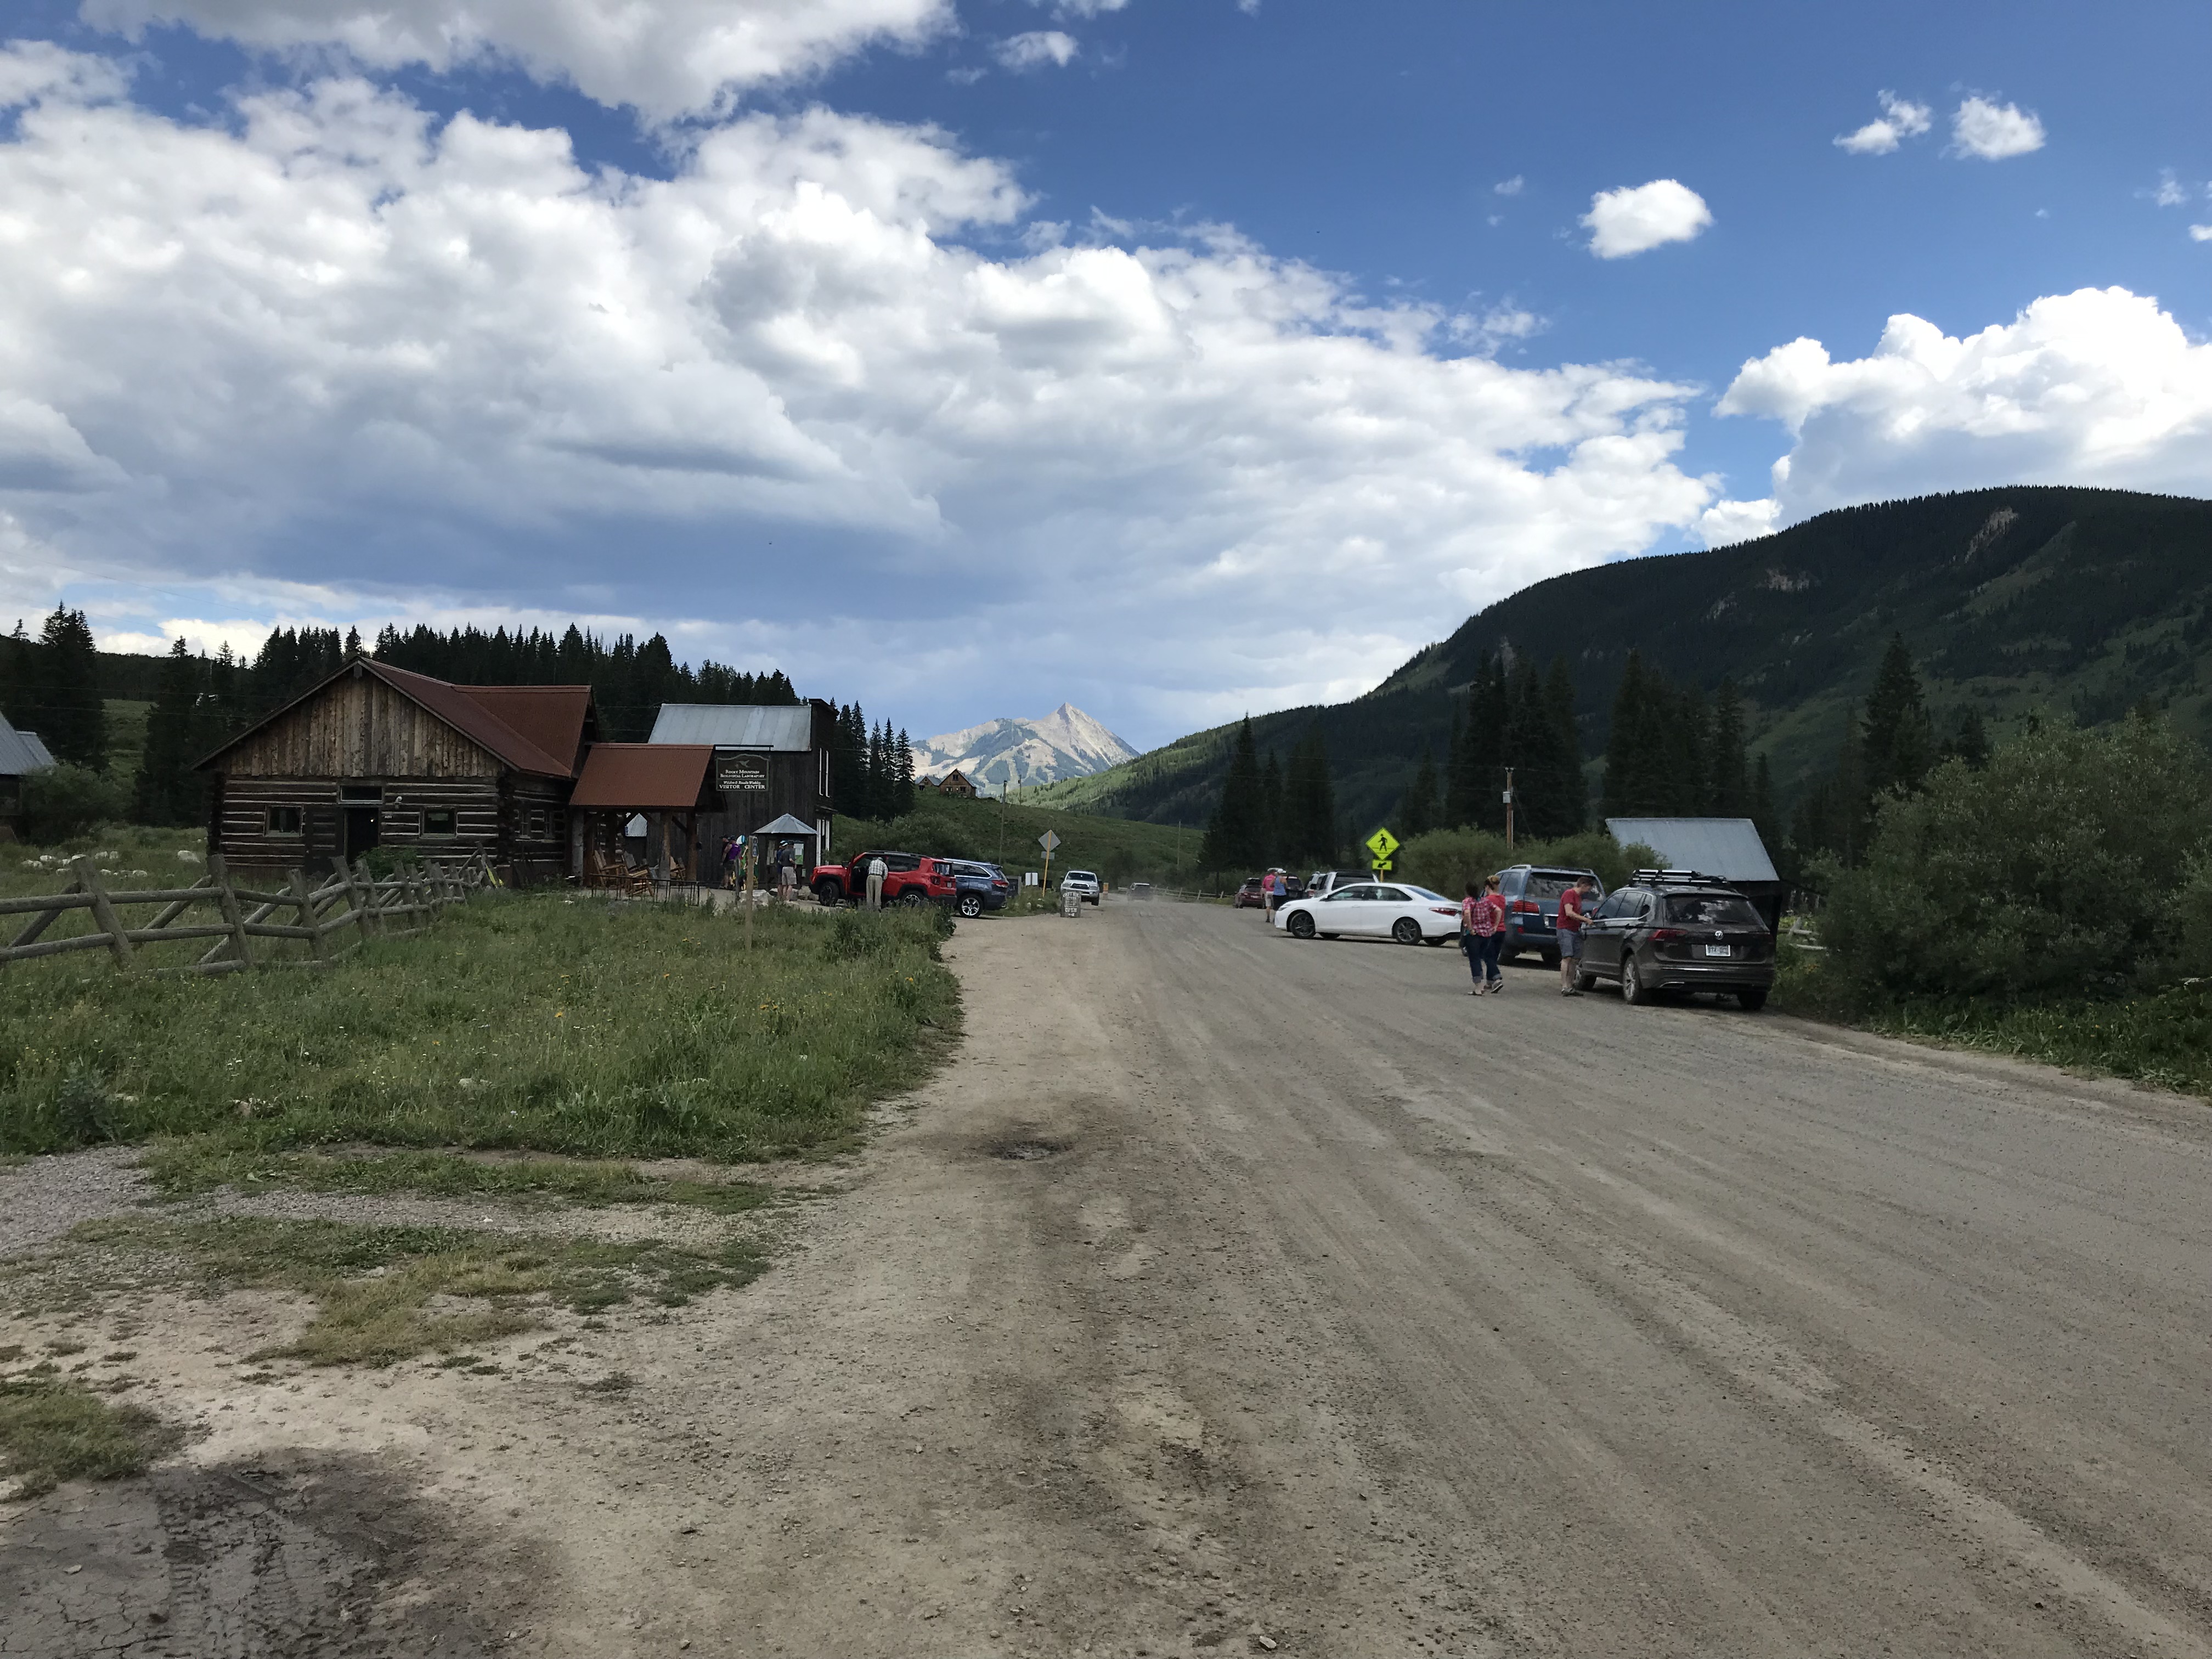 Modern cars line both sides of the dirt street. Old cabins sit in front of a rocky mountain far in the background